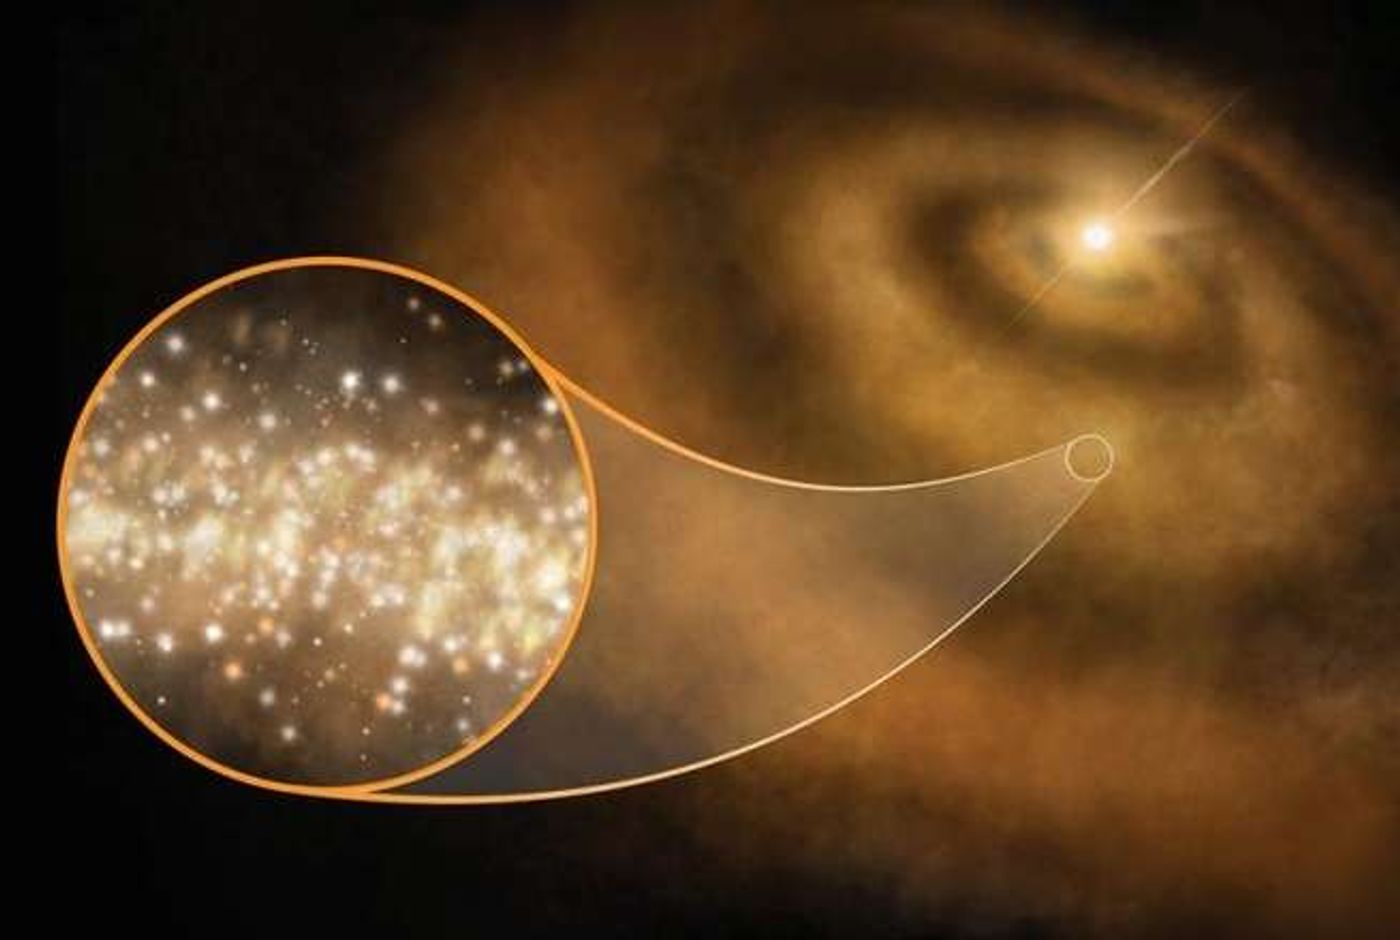 Stellar nanodiamonds may have warped starlight in such a way that it yielded unexpected data during observations.